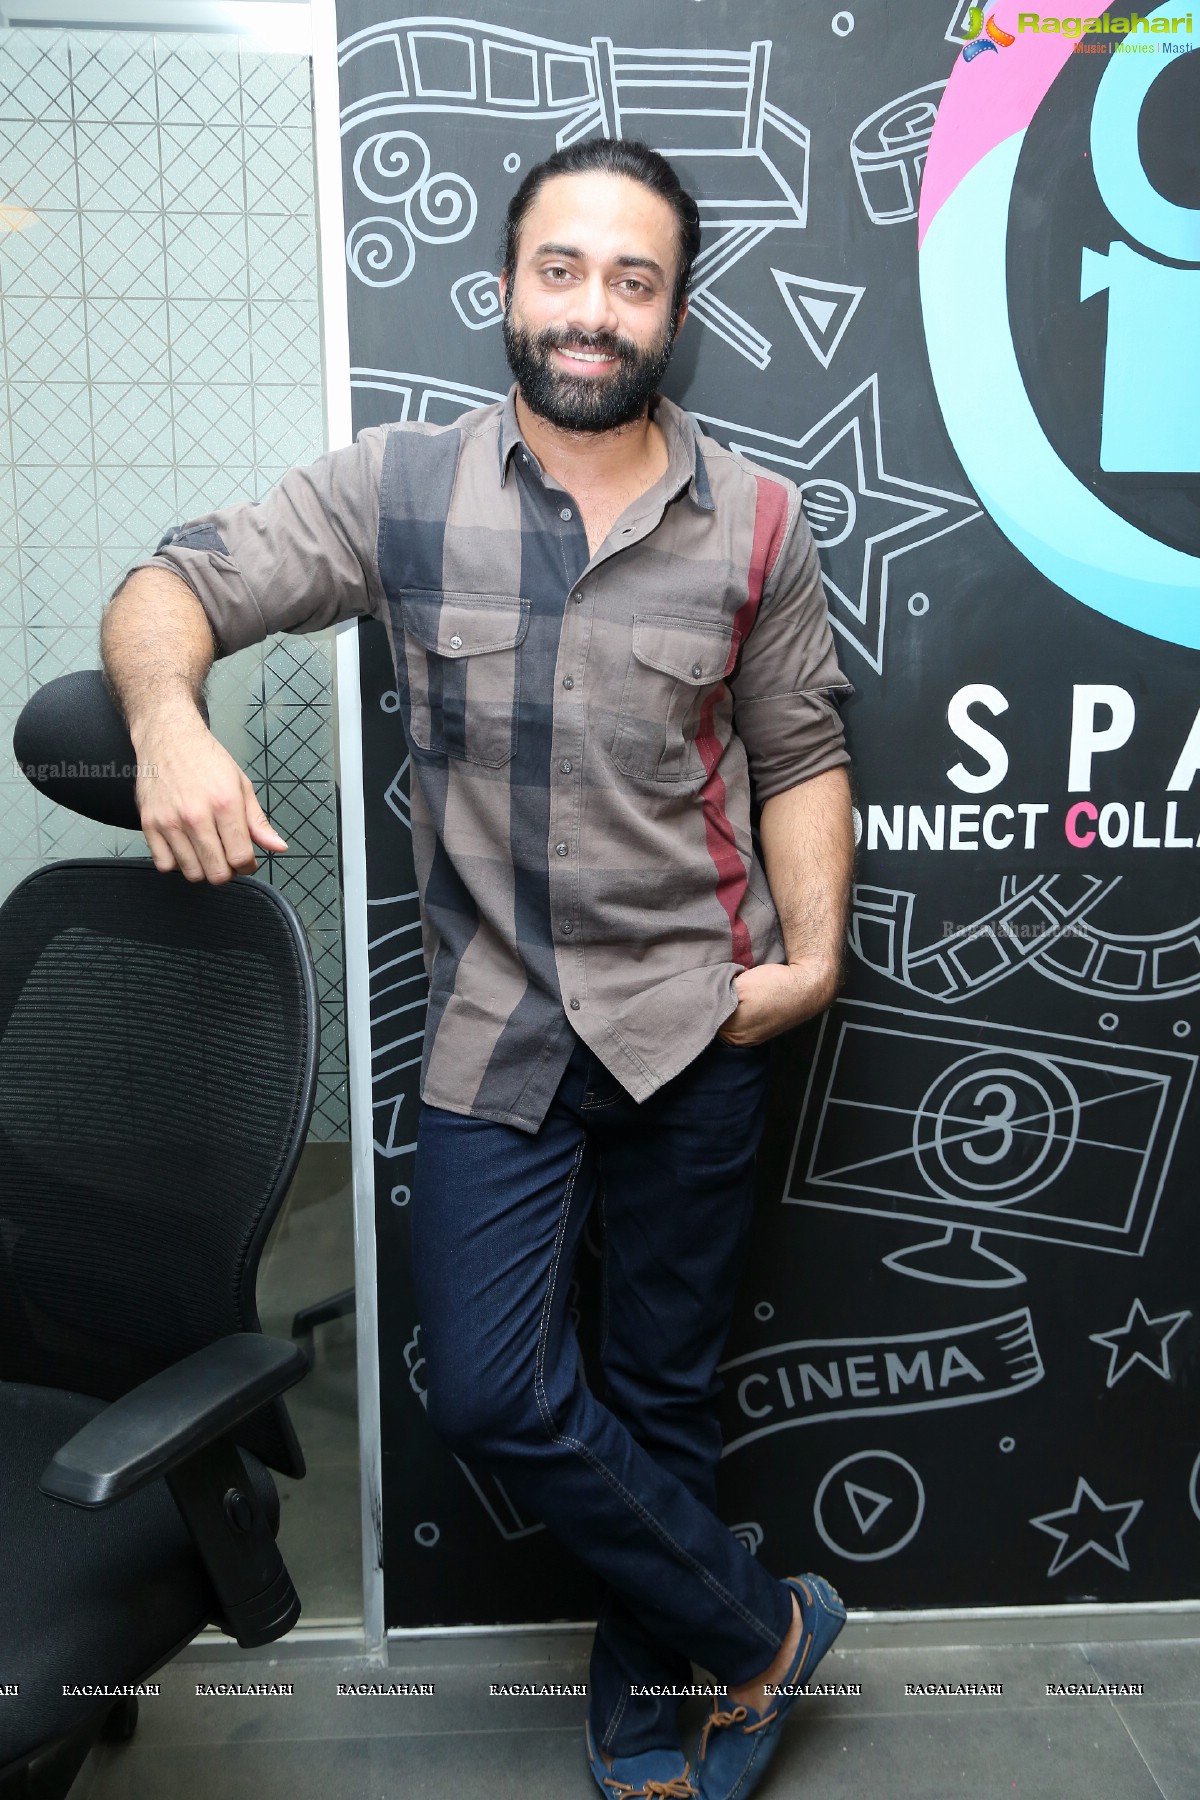 C-Space - The First of Incubator for Film & Media Professionals Launch at Rd#47, Jubilee Hills in Hyderabad